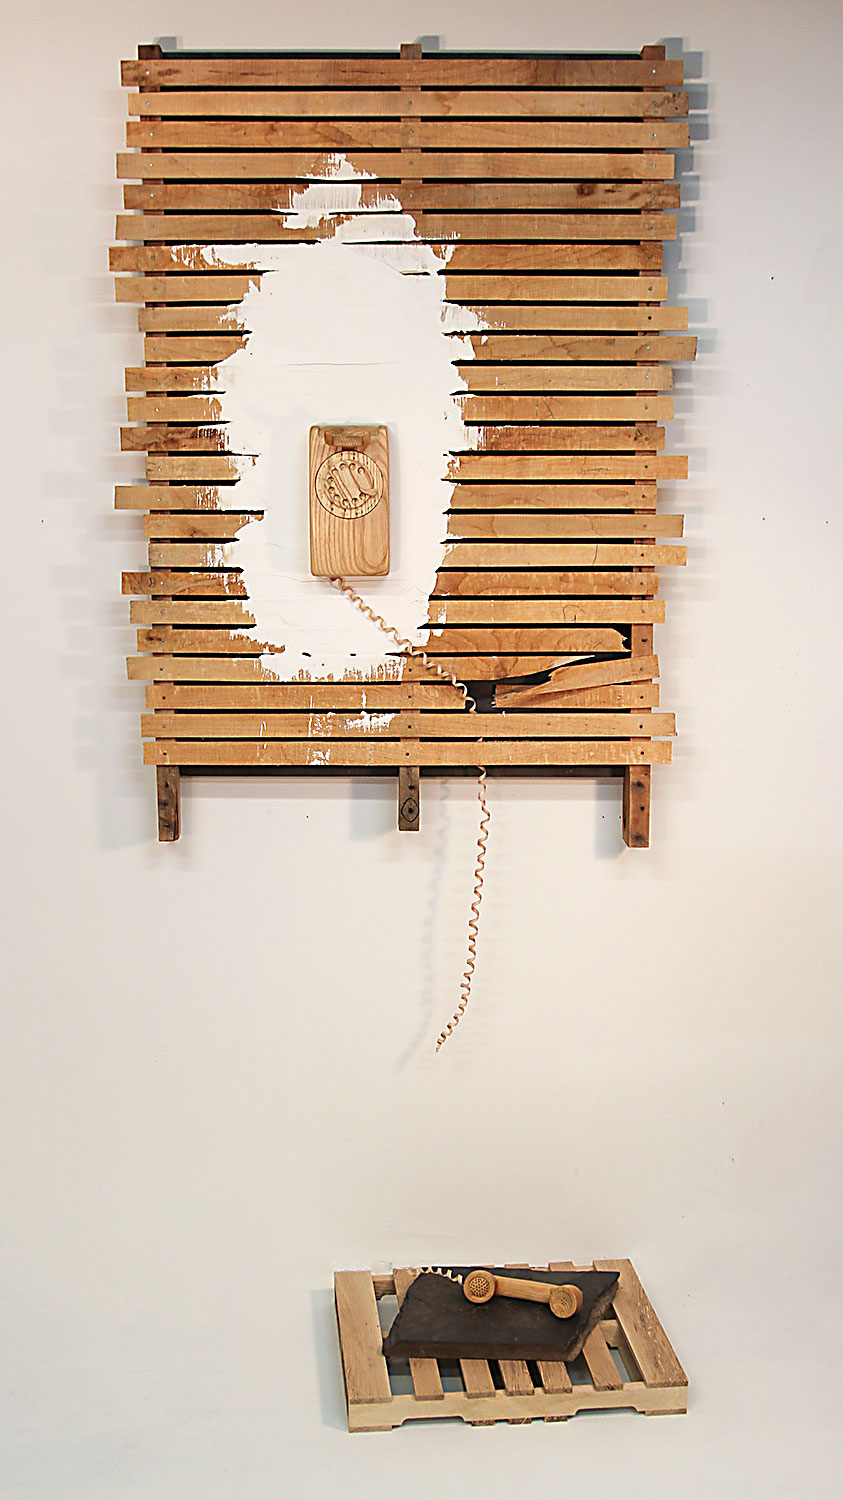 Jere Williams, Phone No. 2, 2014. Ash, oak, maple, plaster, and slate; wall element, 52 x 38 x 10 in., floor element, 6 x 21 x 18 in.